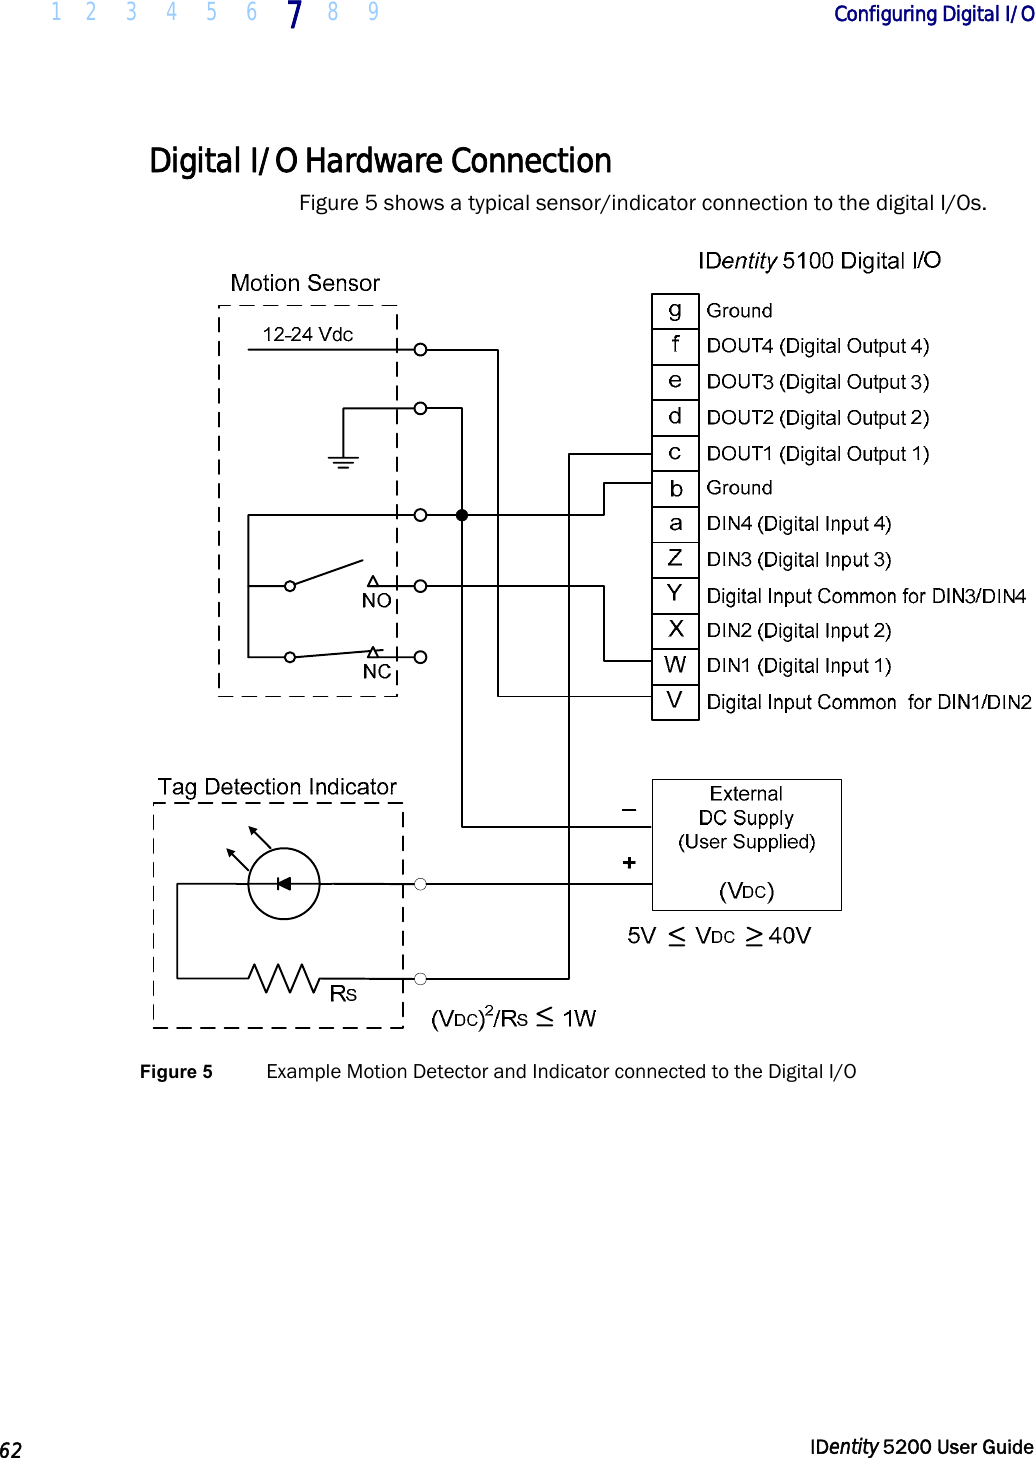  1 2 3 4 5 6 7 8 9       Configuring Digital I/O   62  IDentity 5200 User Guide  Digital I/O Hardware Connection Figure 5 shows a typical sensor/indicator connection to the digital I/Os.  Figure 5 Example Motion Detector and Indicator connected to the Digital I/O    